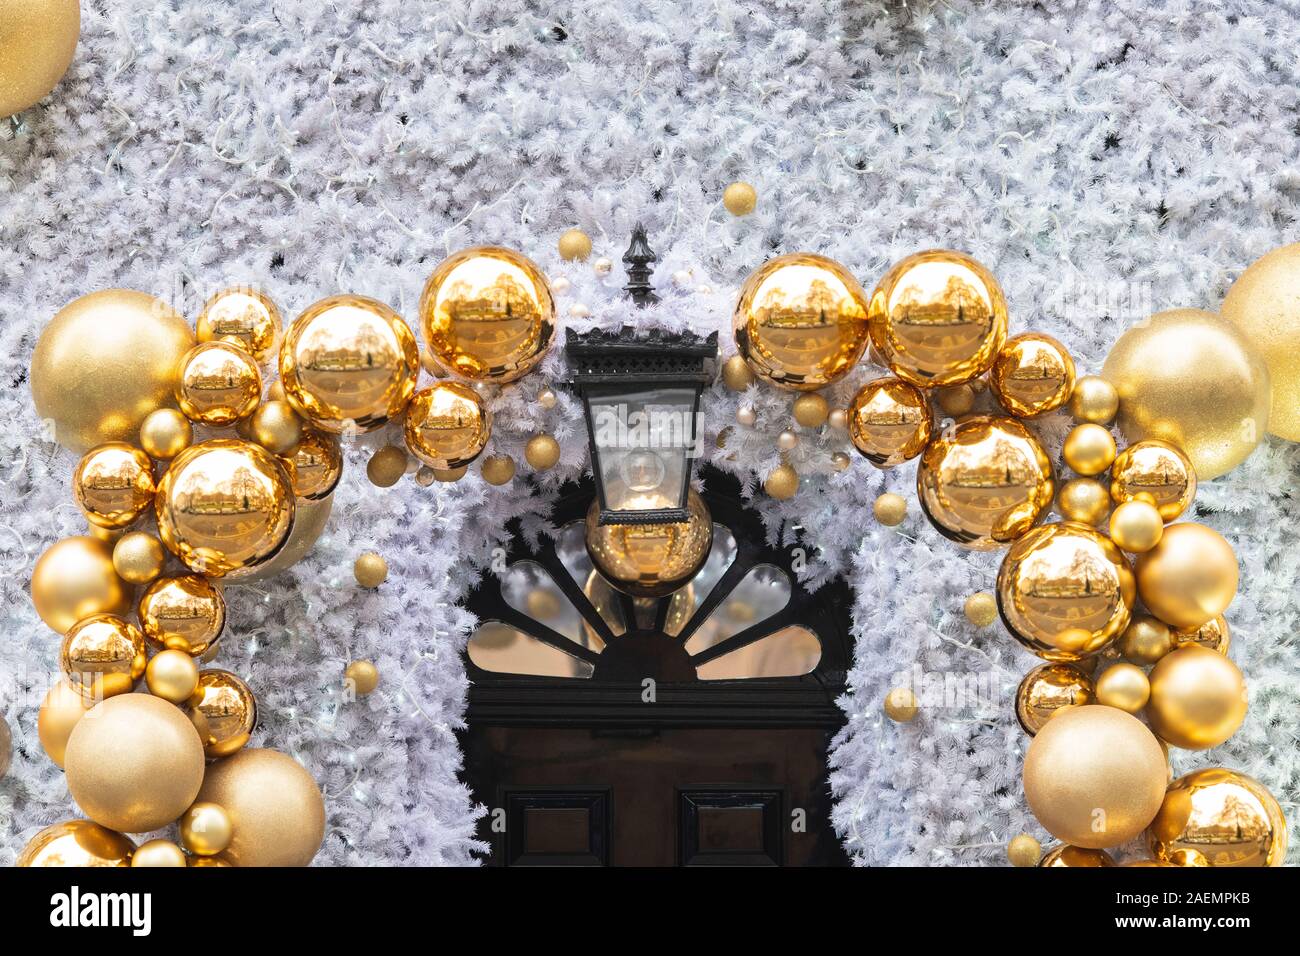 Christmas decorations on the exterior of Annabels Private Club. Berkeley Square, Mayfair, London, England Stock Photo